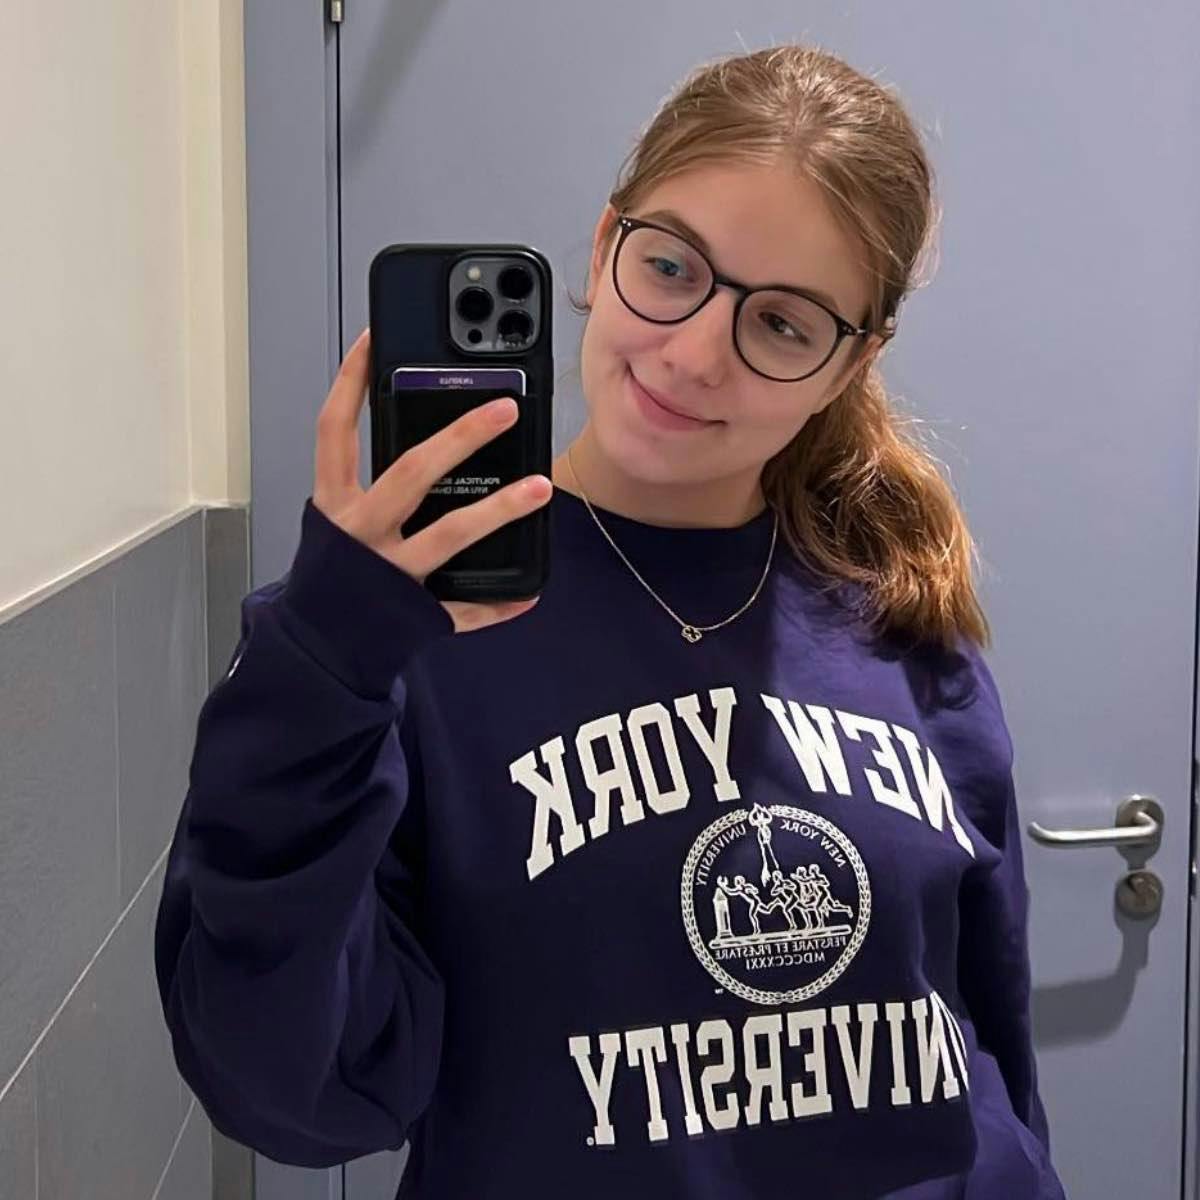 From IB school in Poland to NYU Abu Dhabi with a full-ride scholarship